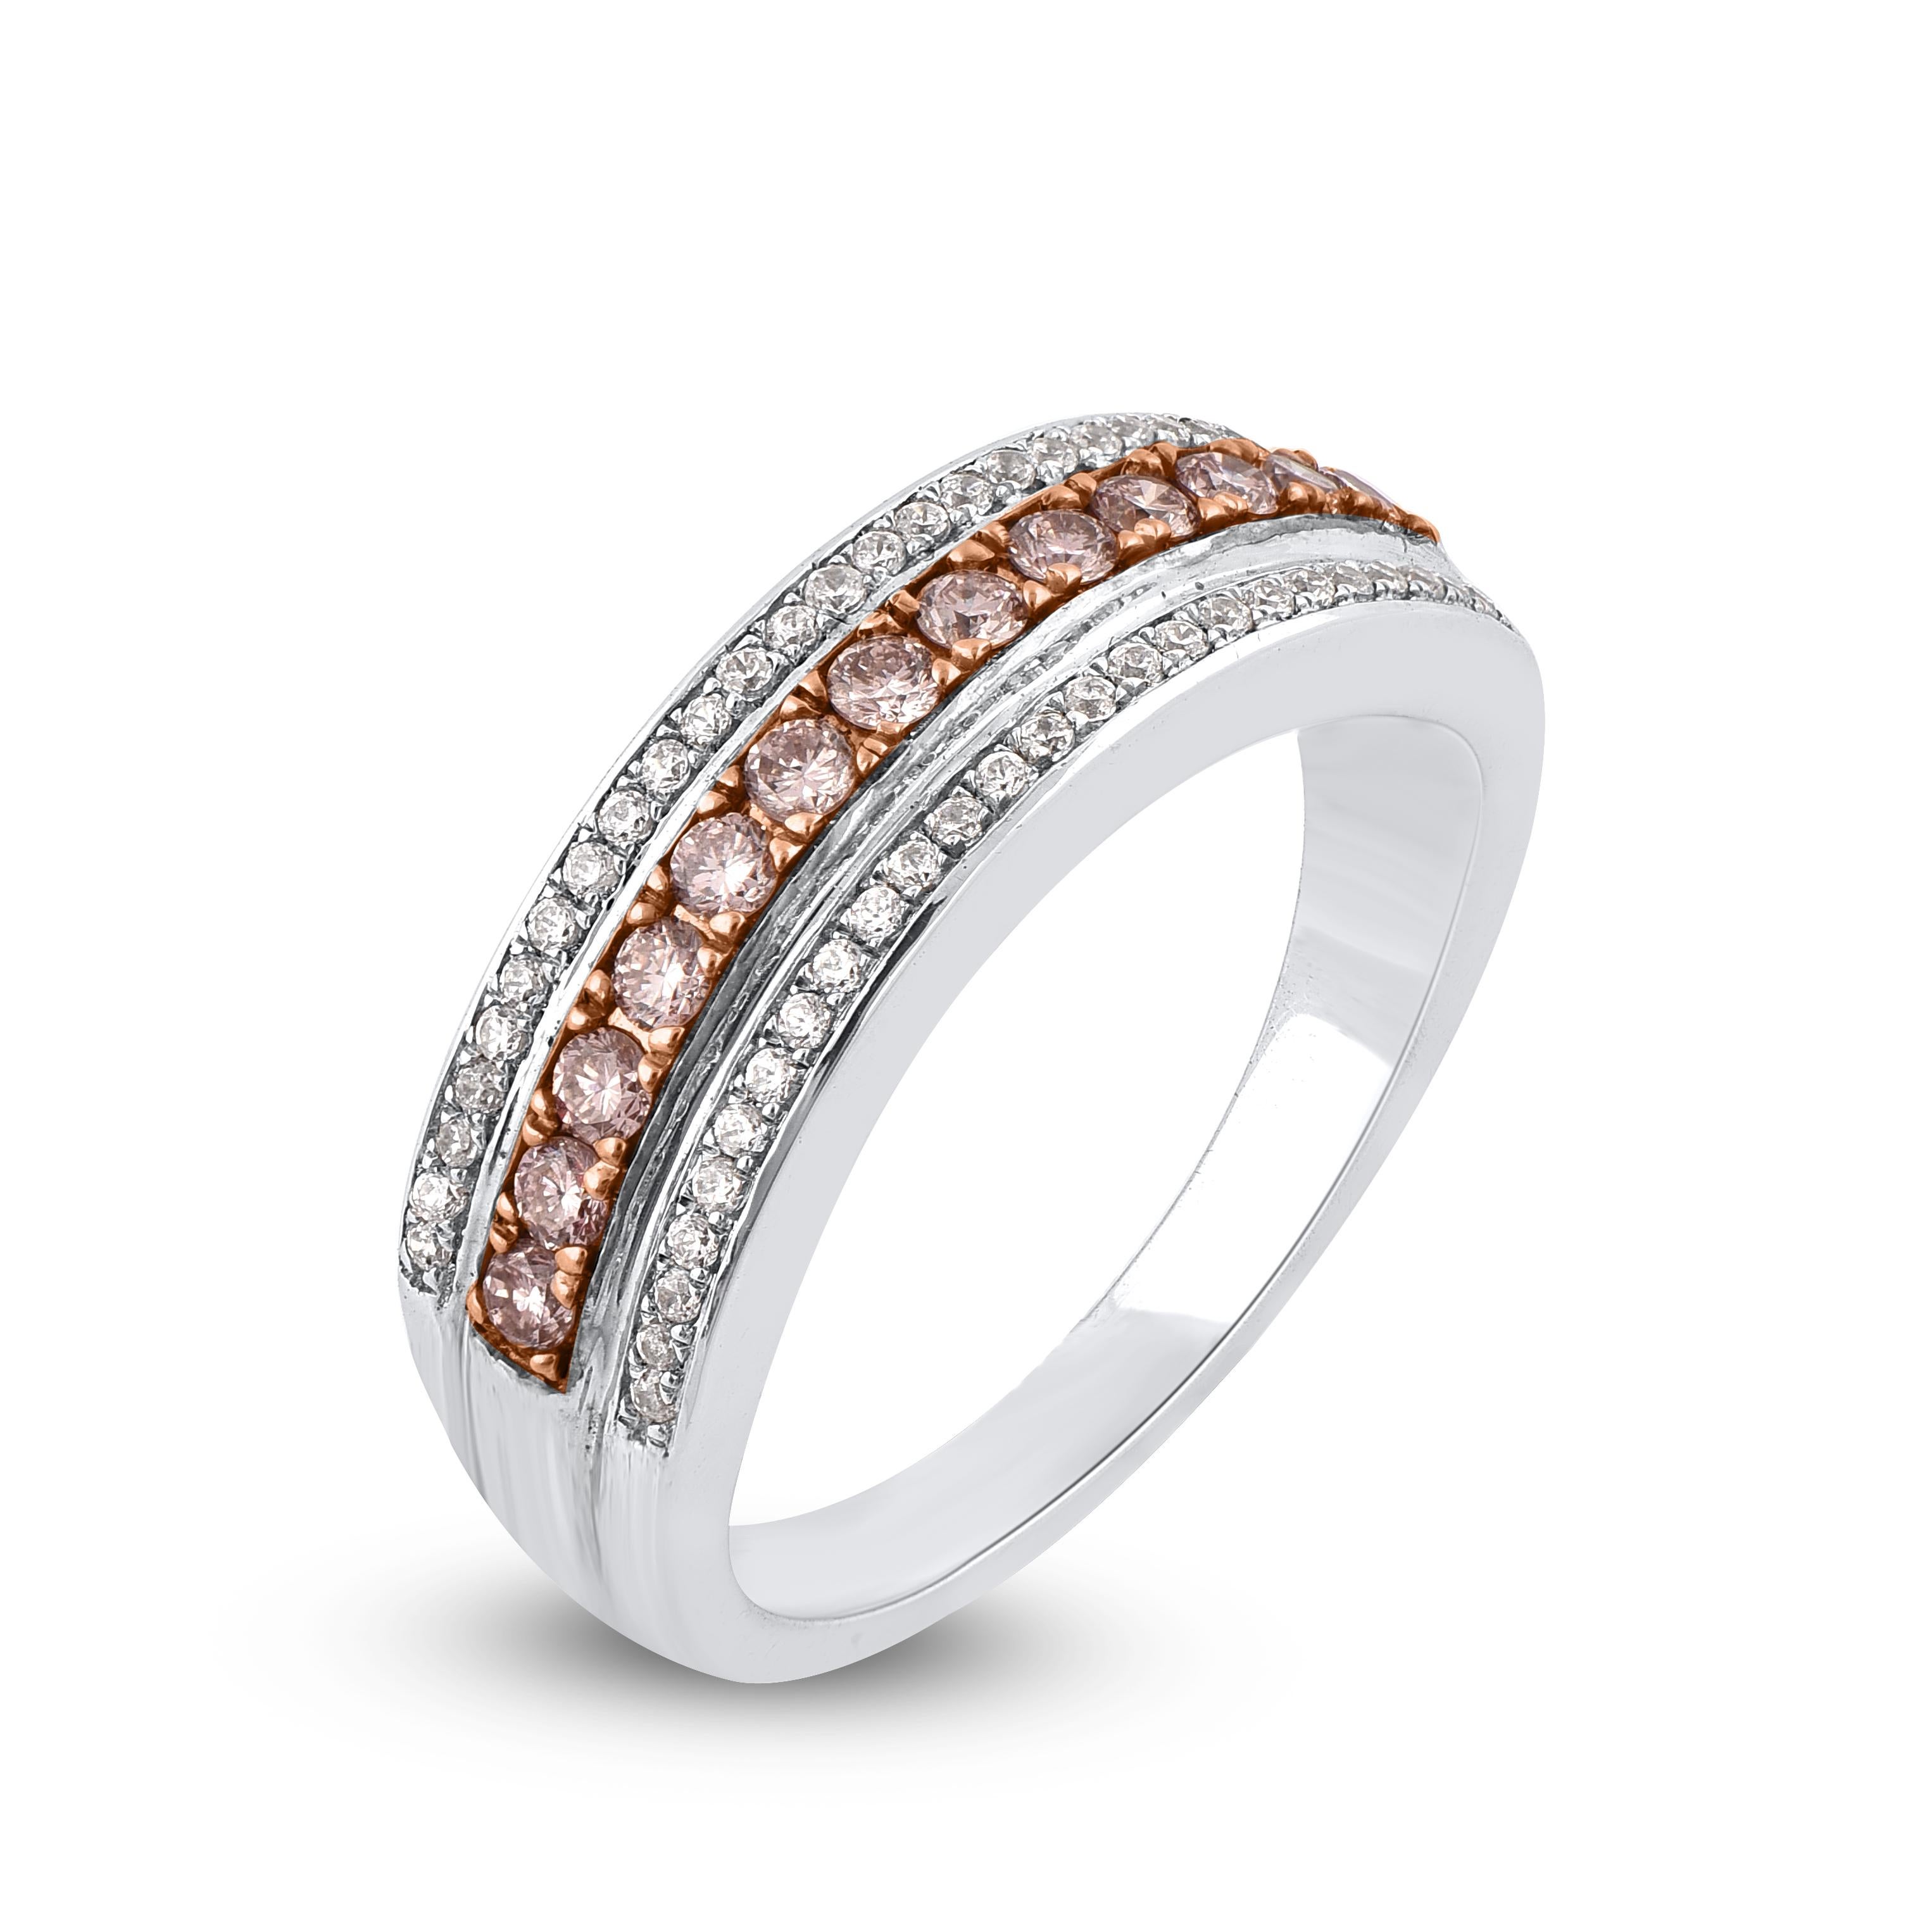 This Wide Wedding Band is expertly crafted in 18 Karat white gold and features 50 white and 13 pink diamonds set in a beautiful design in micro pave setting. We only use 100% natural and conflict free diamonds which sparkles in H-I color I1 clarity.